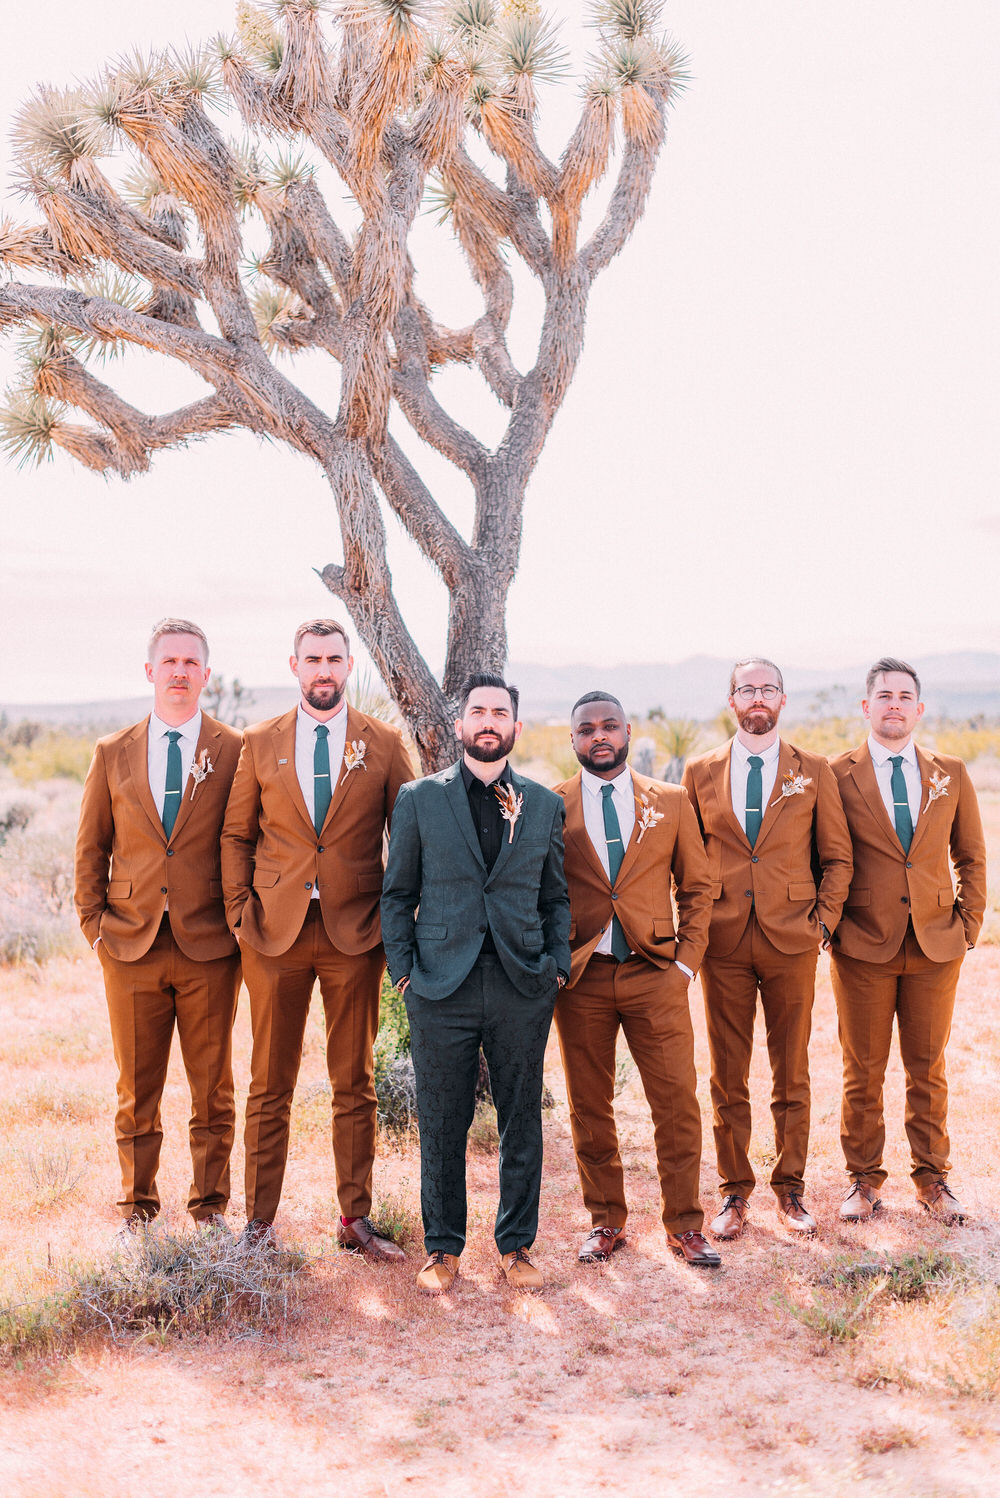 Suit or Tuxedo: What Should Grooms Wear to Their Wedding?